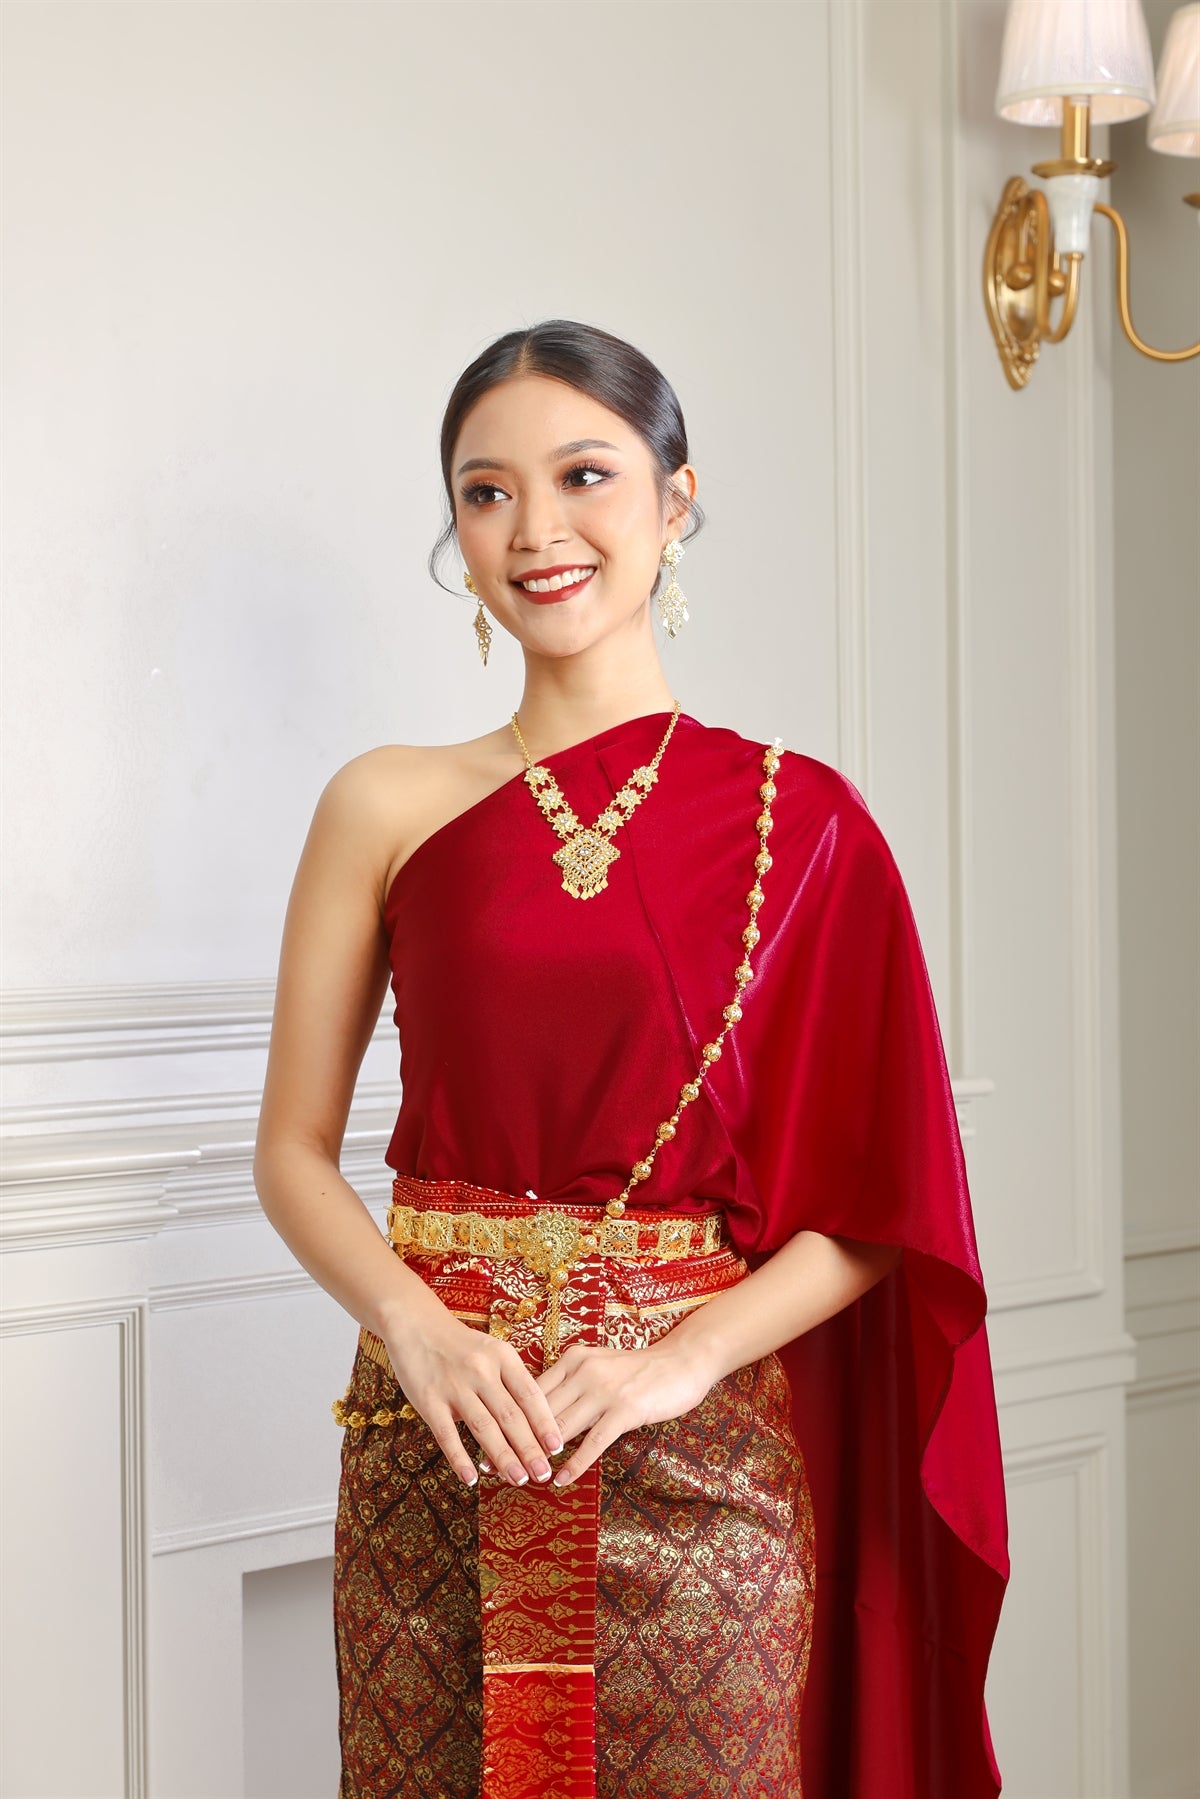 A Thai woman smiles while wearing her traditional Thai dress and jewelry.